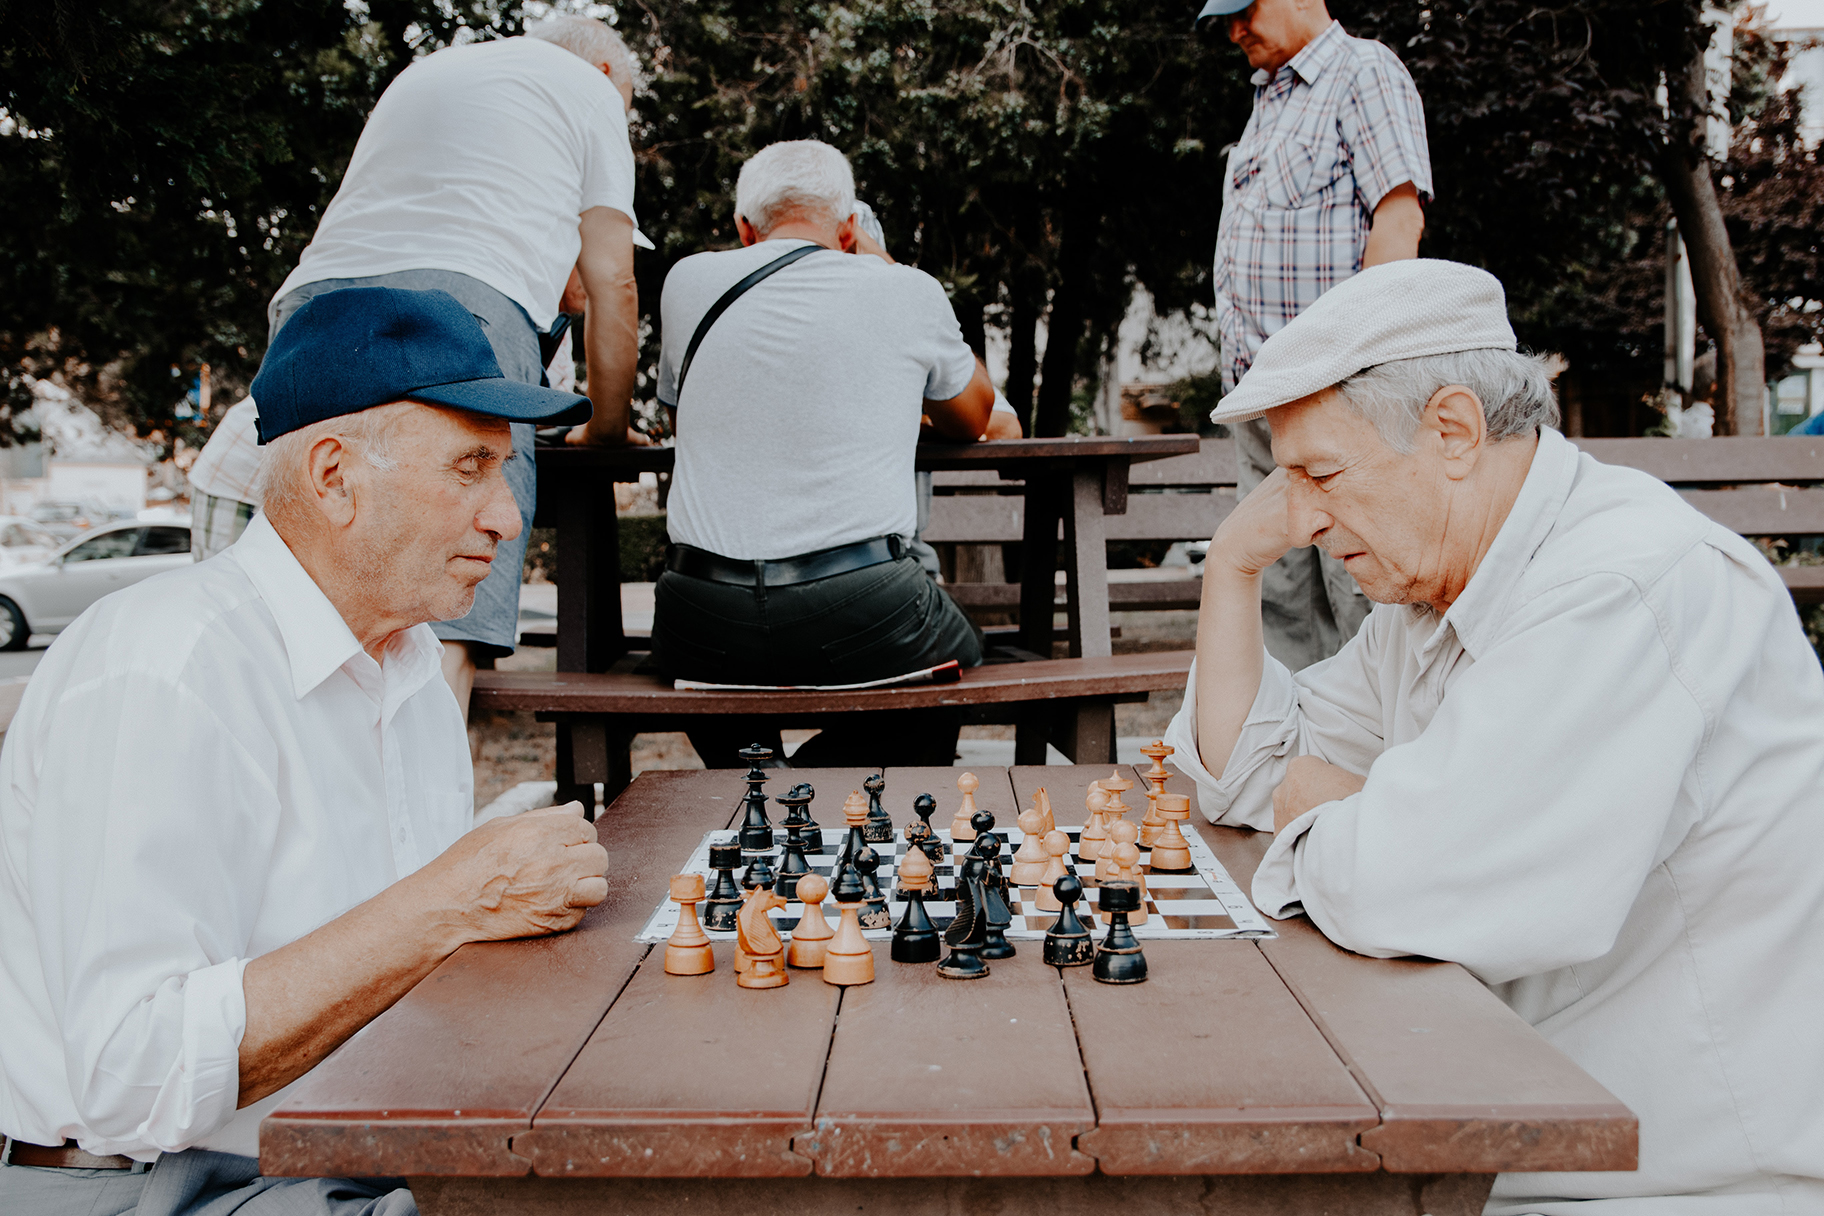 Veterans playing chess in a park